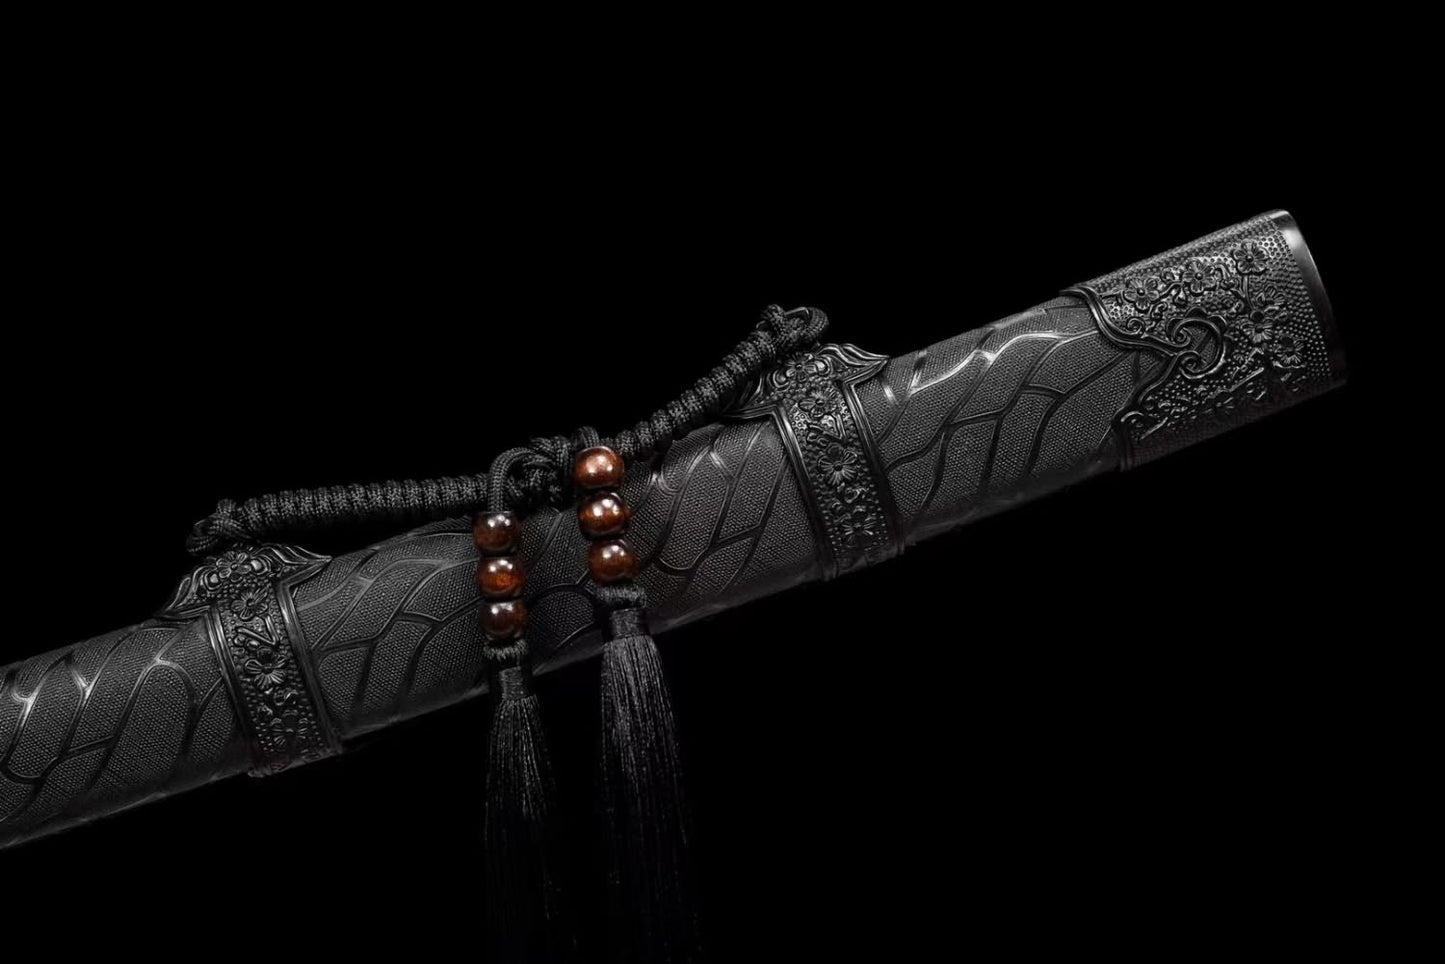 Qing dao Sword,Forged High Carbon Steel Black Blade,Solid Wood Wrapped Faux Leather Scabbard,Alloy Fittings